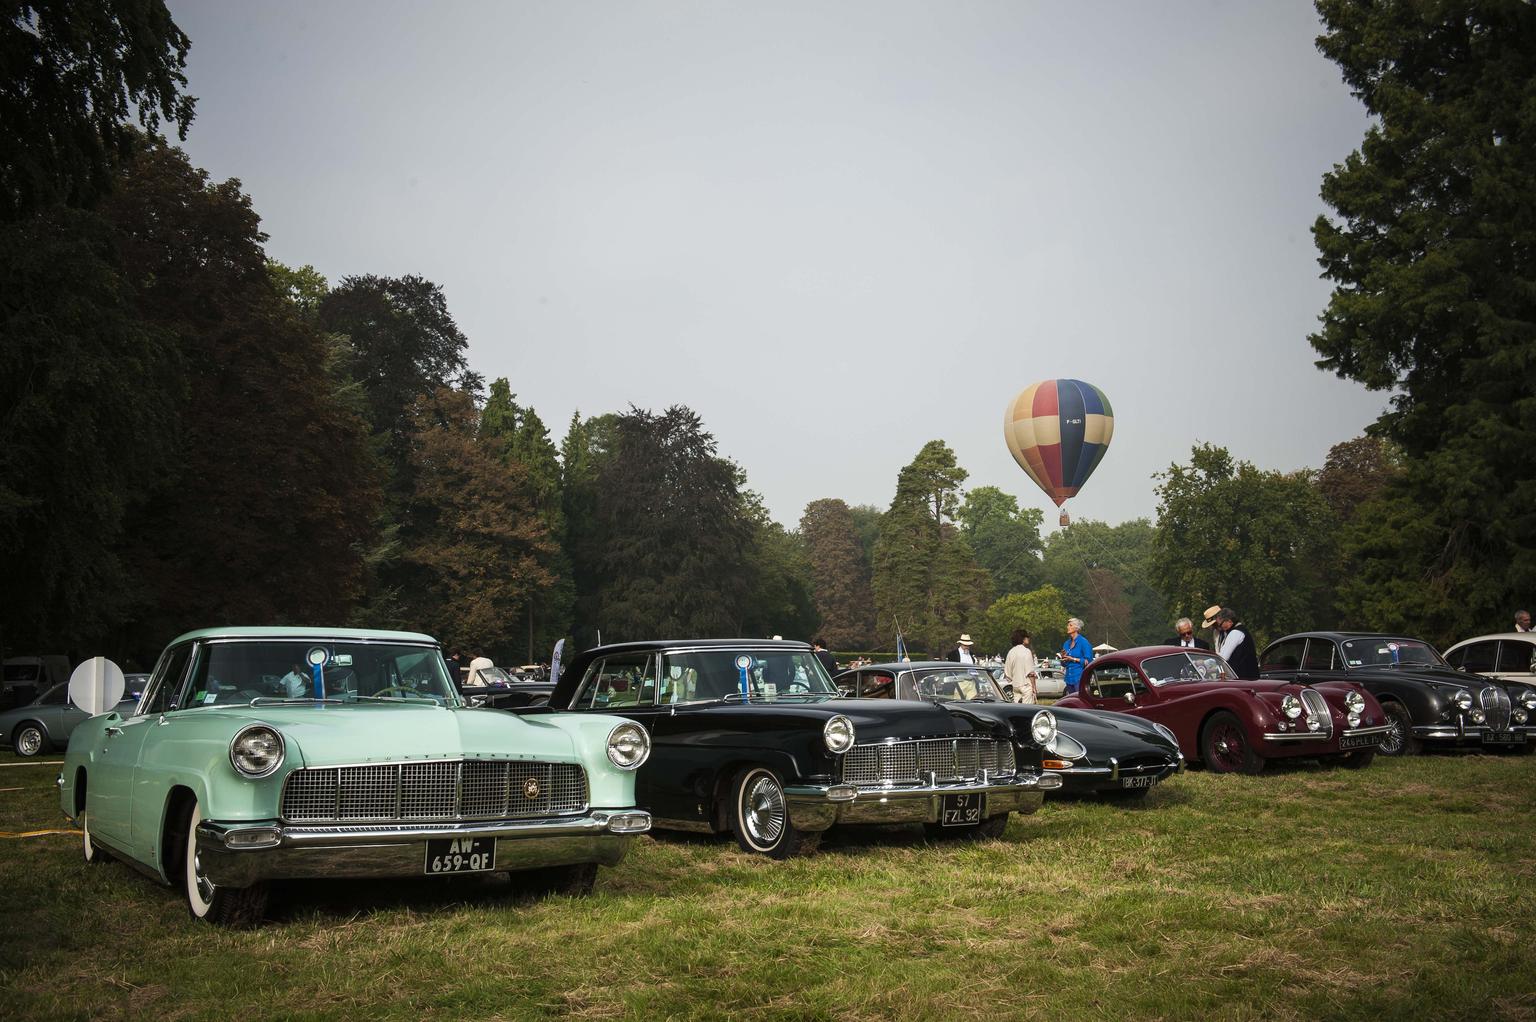 Cars were the main focus at Chantilly Arts & Elegance, with 100 years of motoring history spread graciously across the acres of manicured lawns and rolling dells and woodlands of the estate.